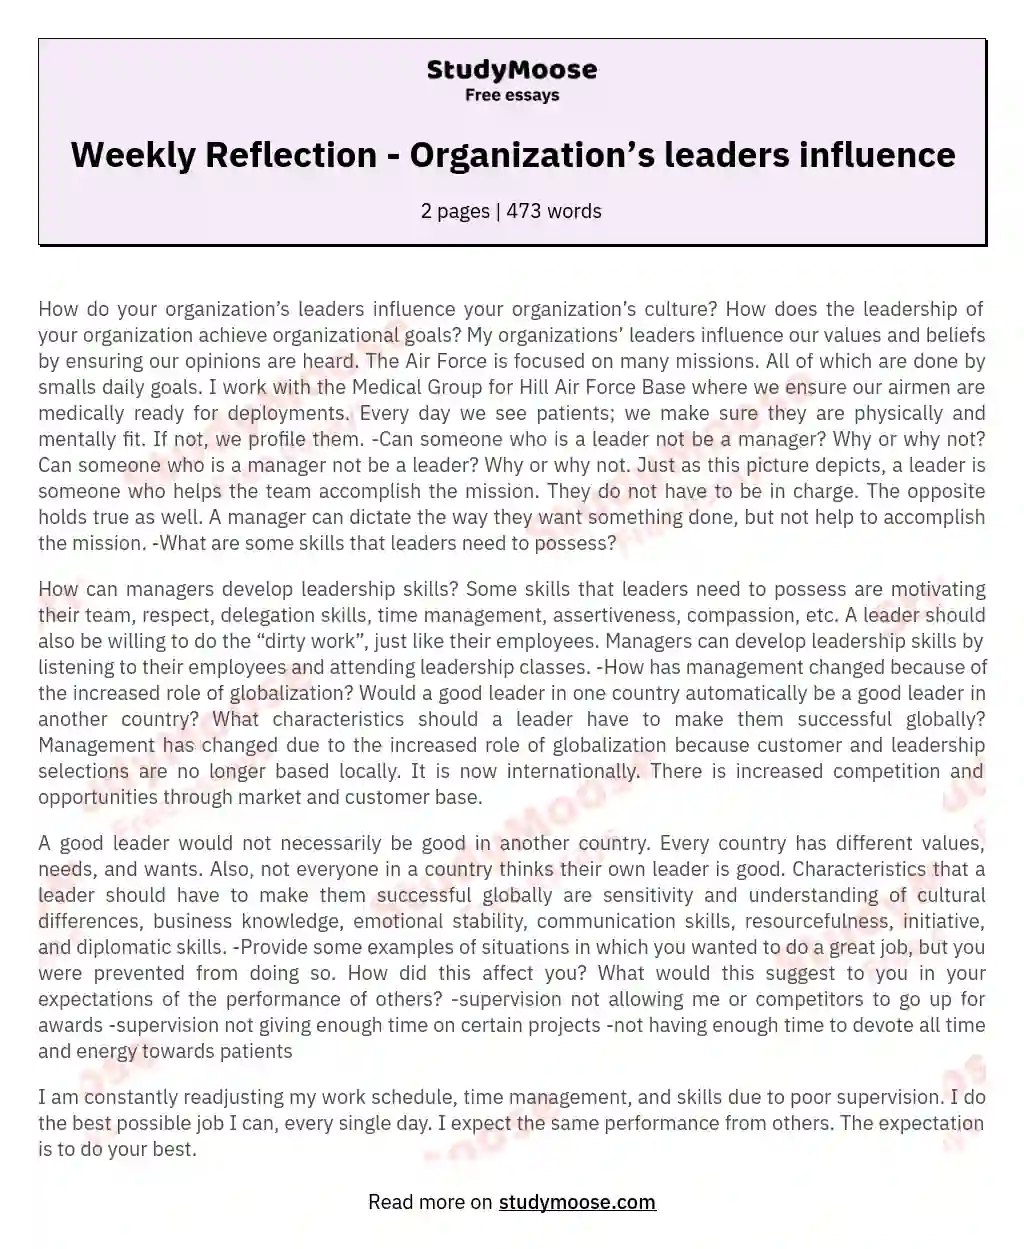 Weekly Reflection - Organization’s leaders influence essay